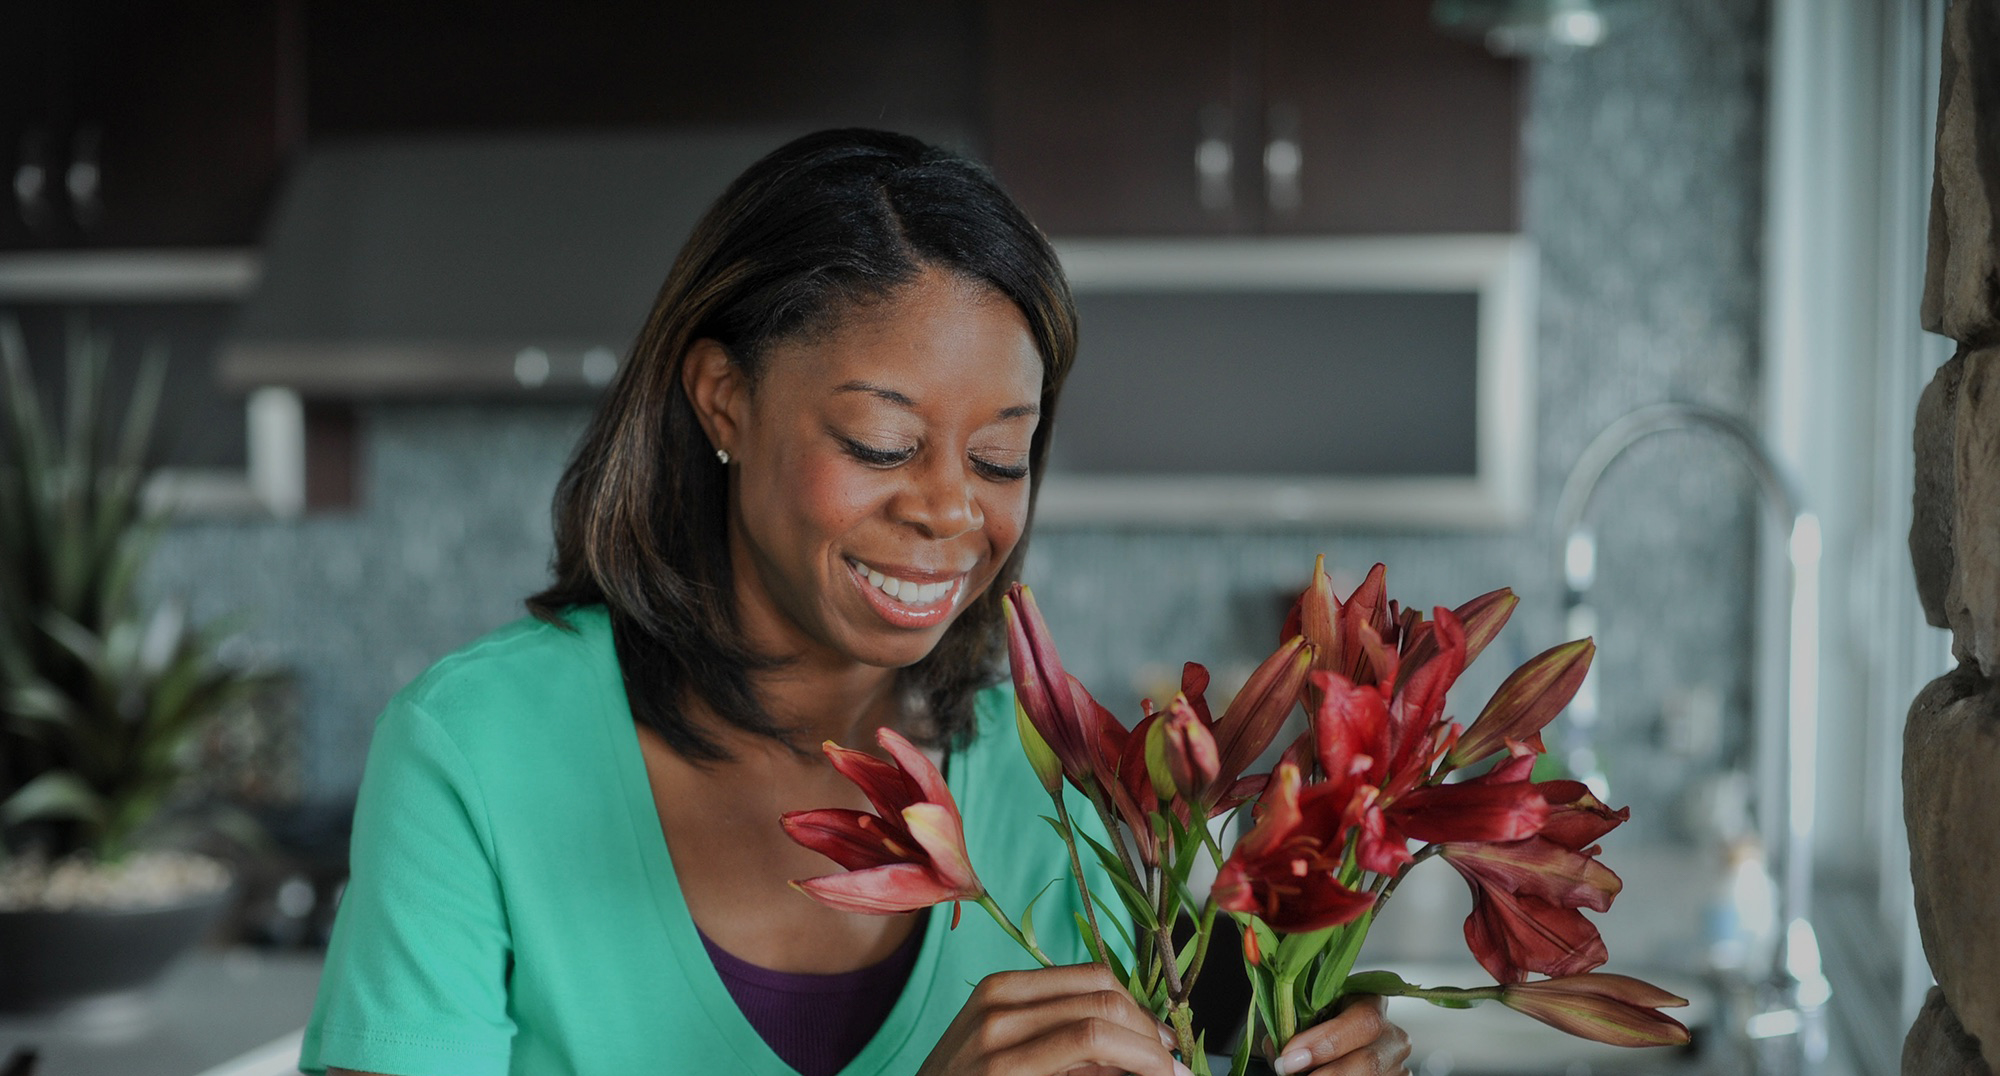 Woman arranging flowers at home.